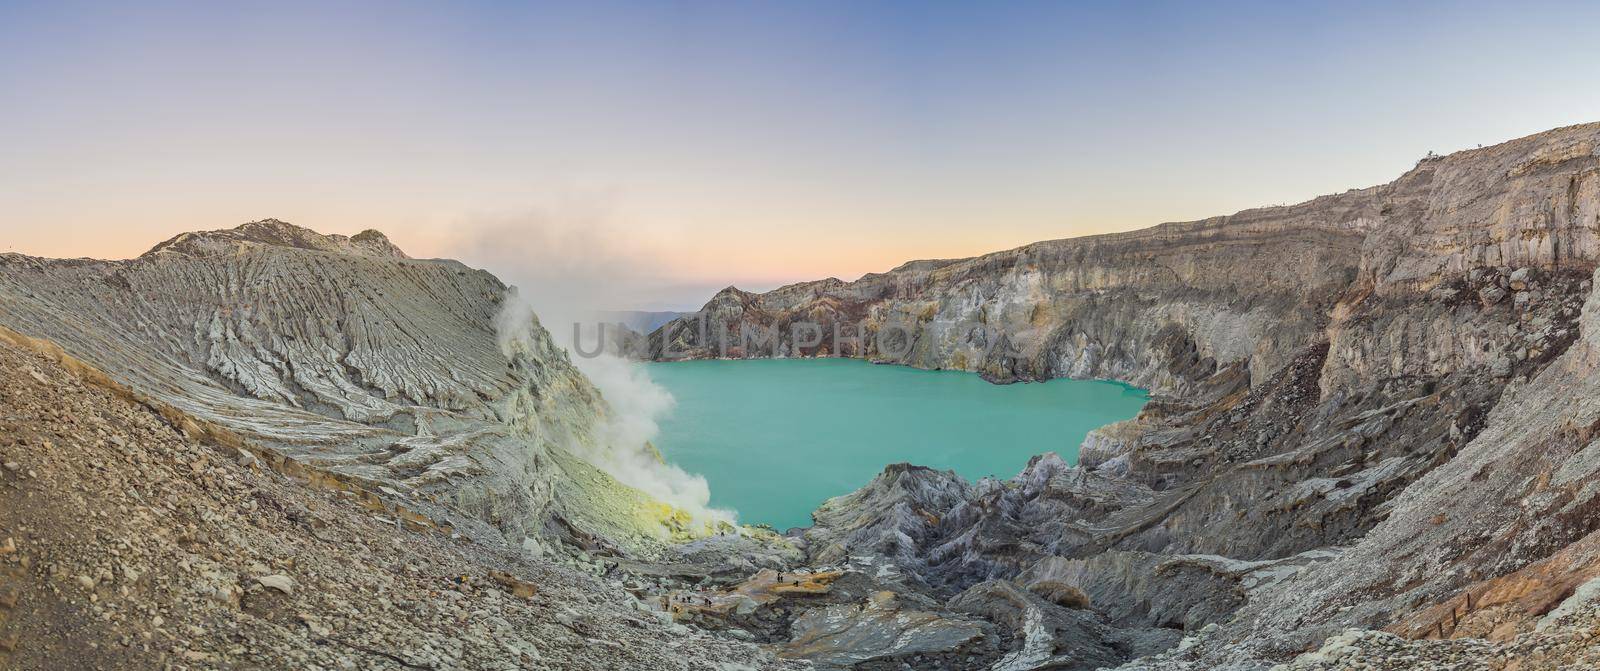 Panoramic shot of the Ijen volcano or Kawah Ijen on the Indonesian language. Famous volcano containing the biggest in the world acid lake and sulfur mining spot at the place where volcanic gasses come from the volcano.